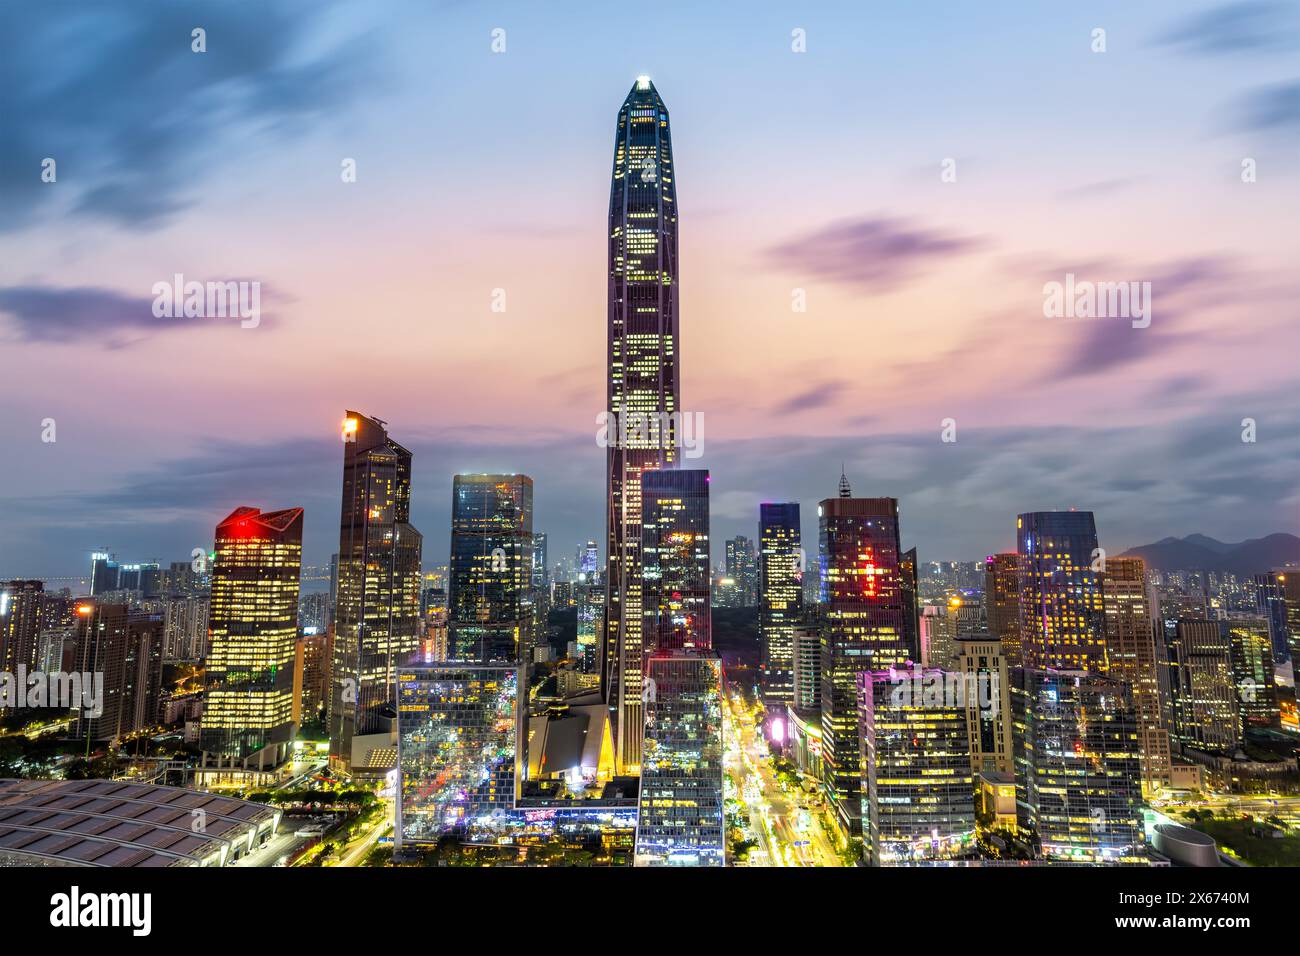 Shenzhen skyline cityscape with skyscrapers in downtown at sunset twilight in Shenzhen, China Stock Photo